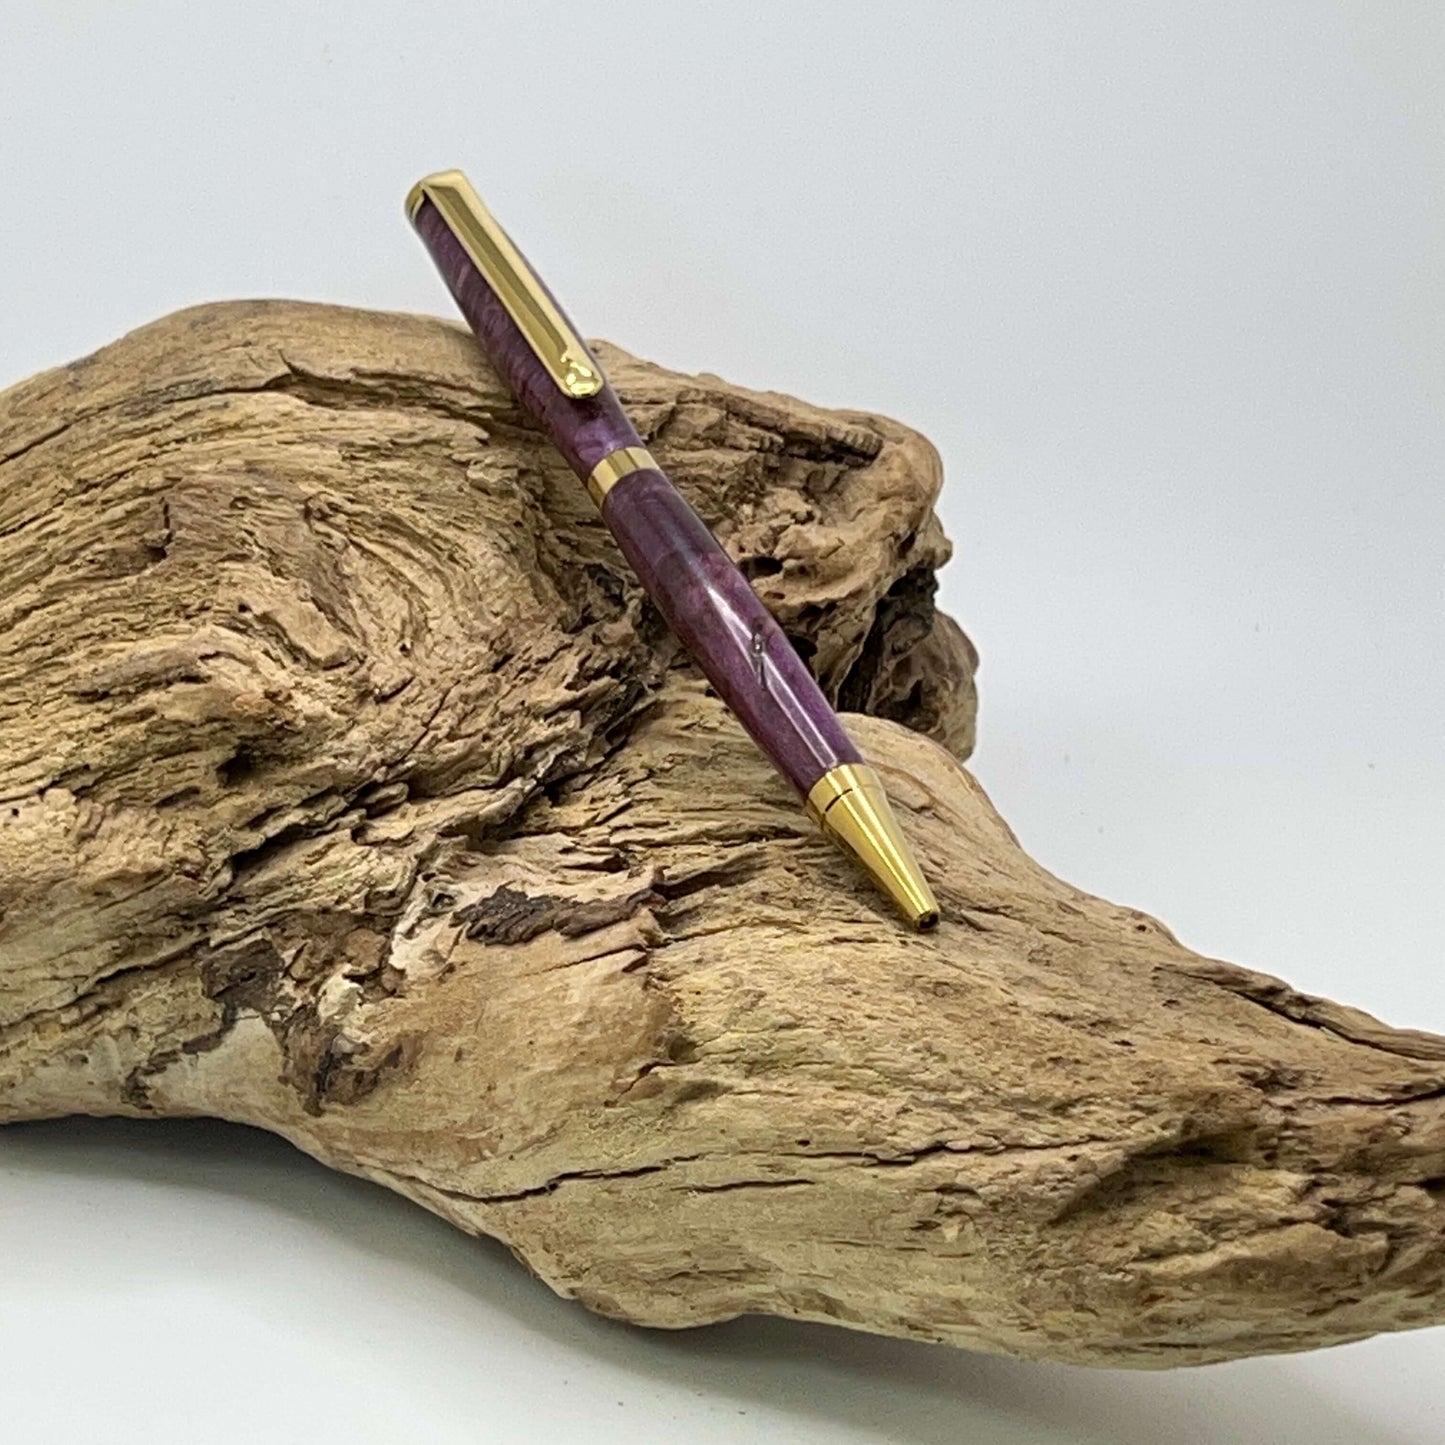 Handcrafted Box elder wood pen dyed purple setting on driftwood